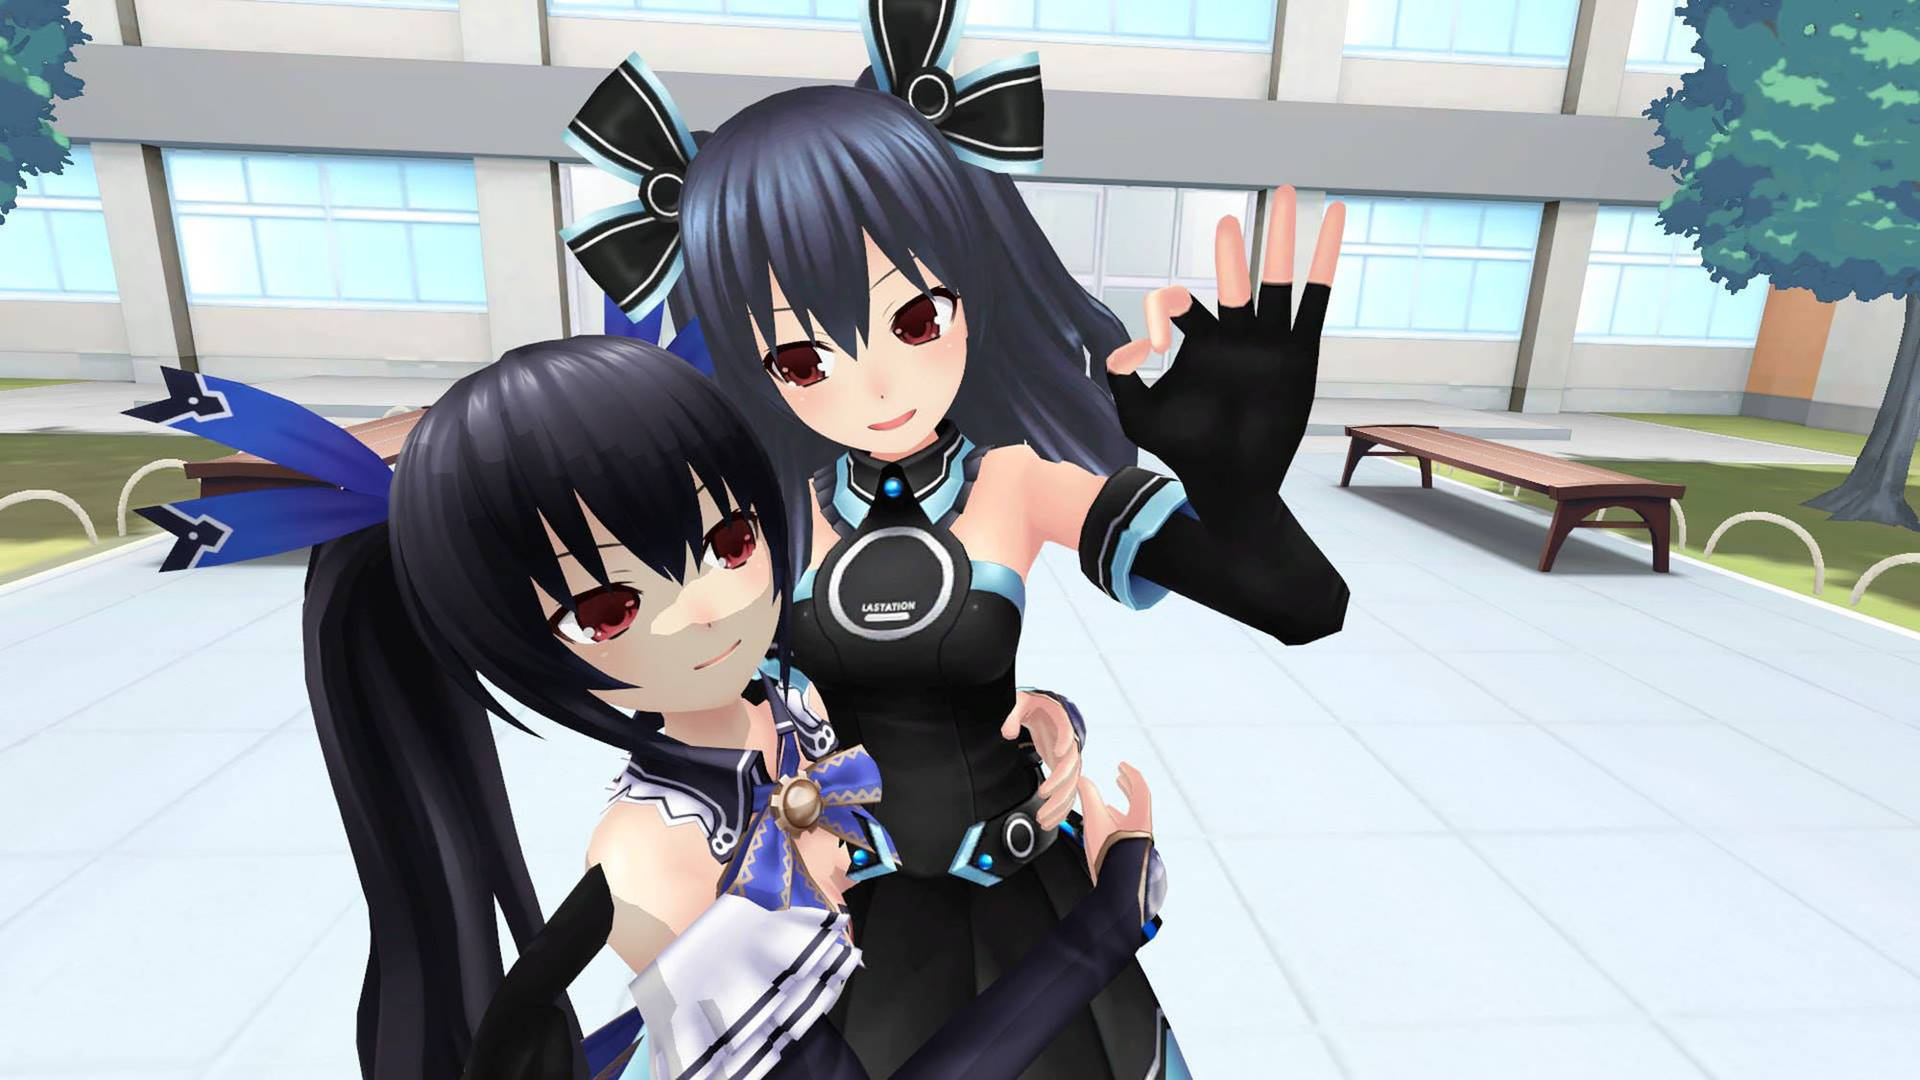 Vrchat Friends Uni And Noire In A Virtual World Background